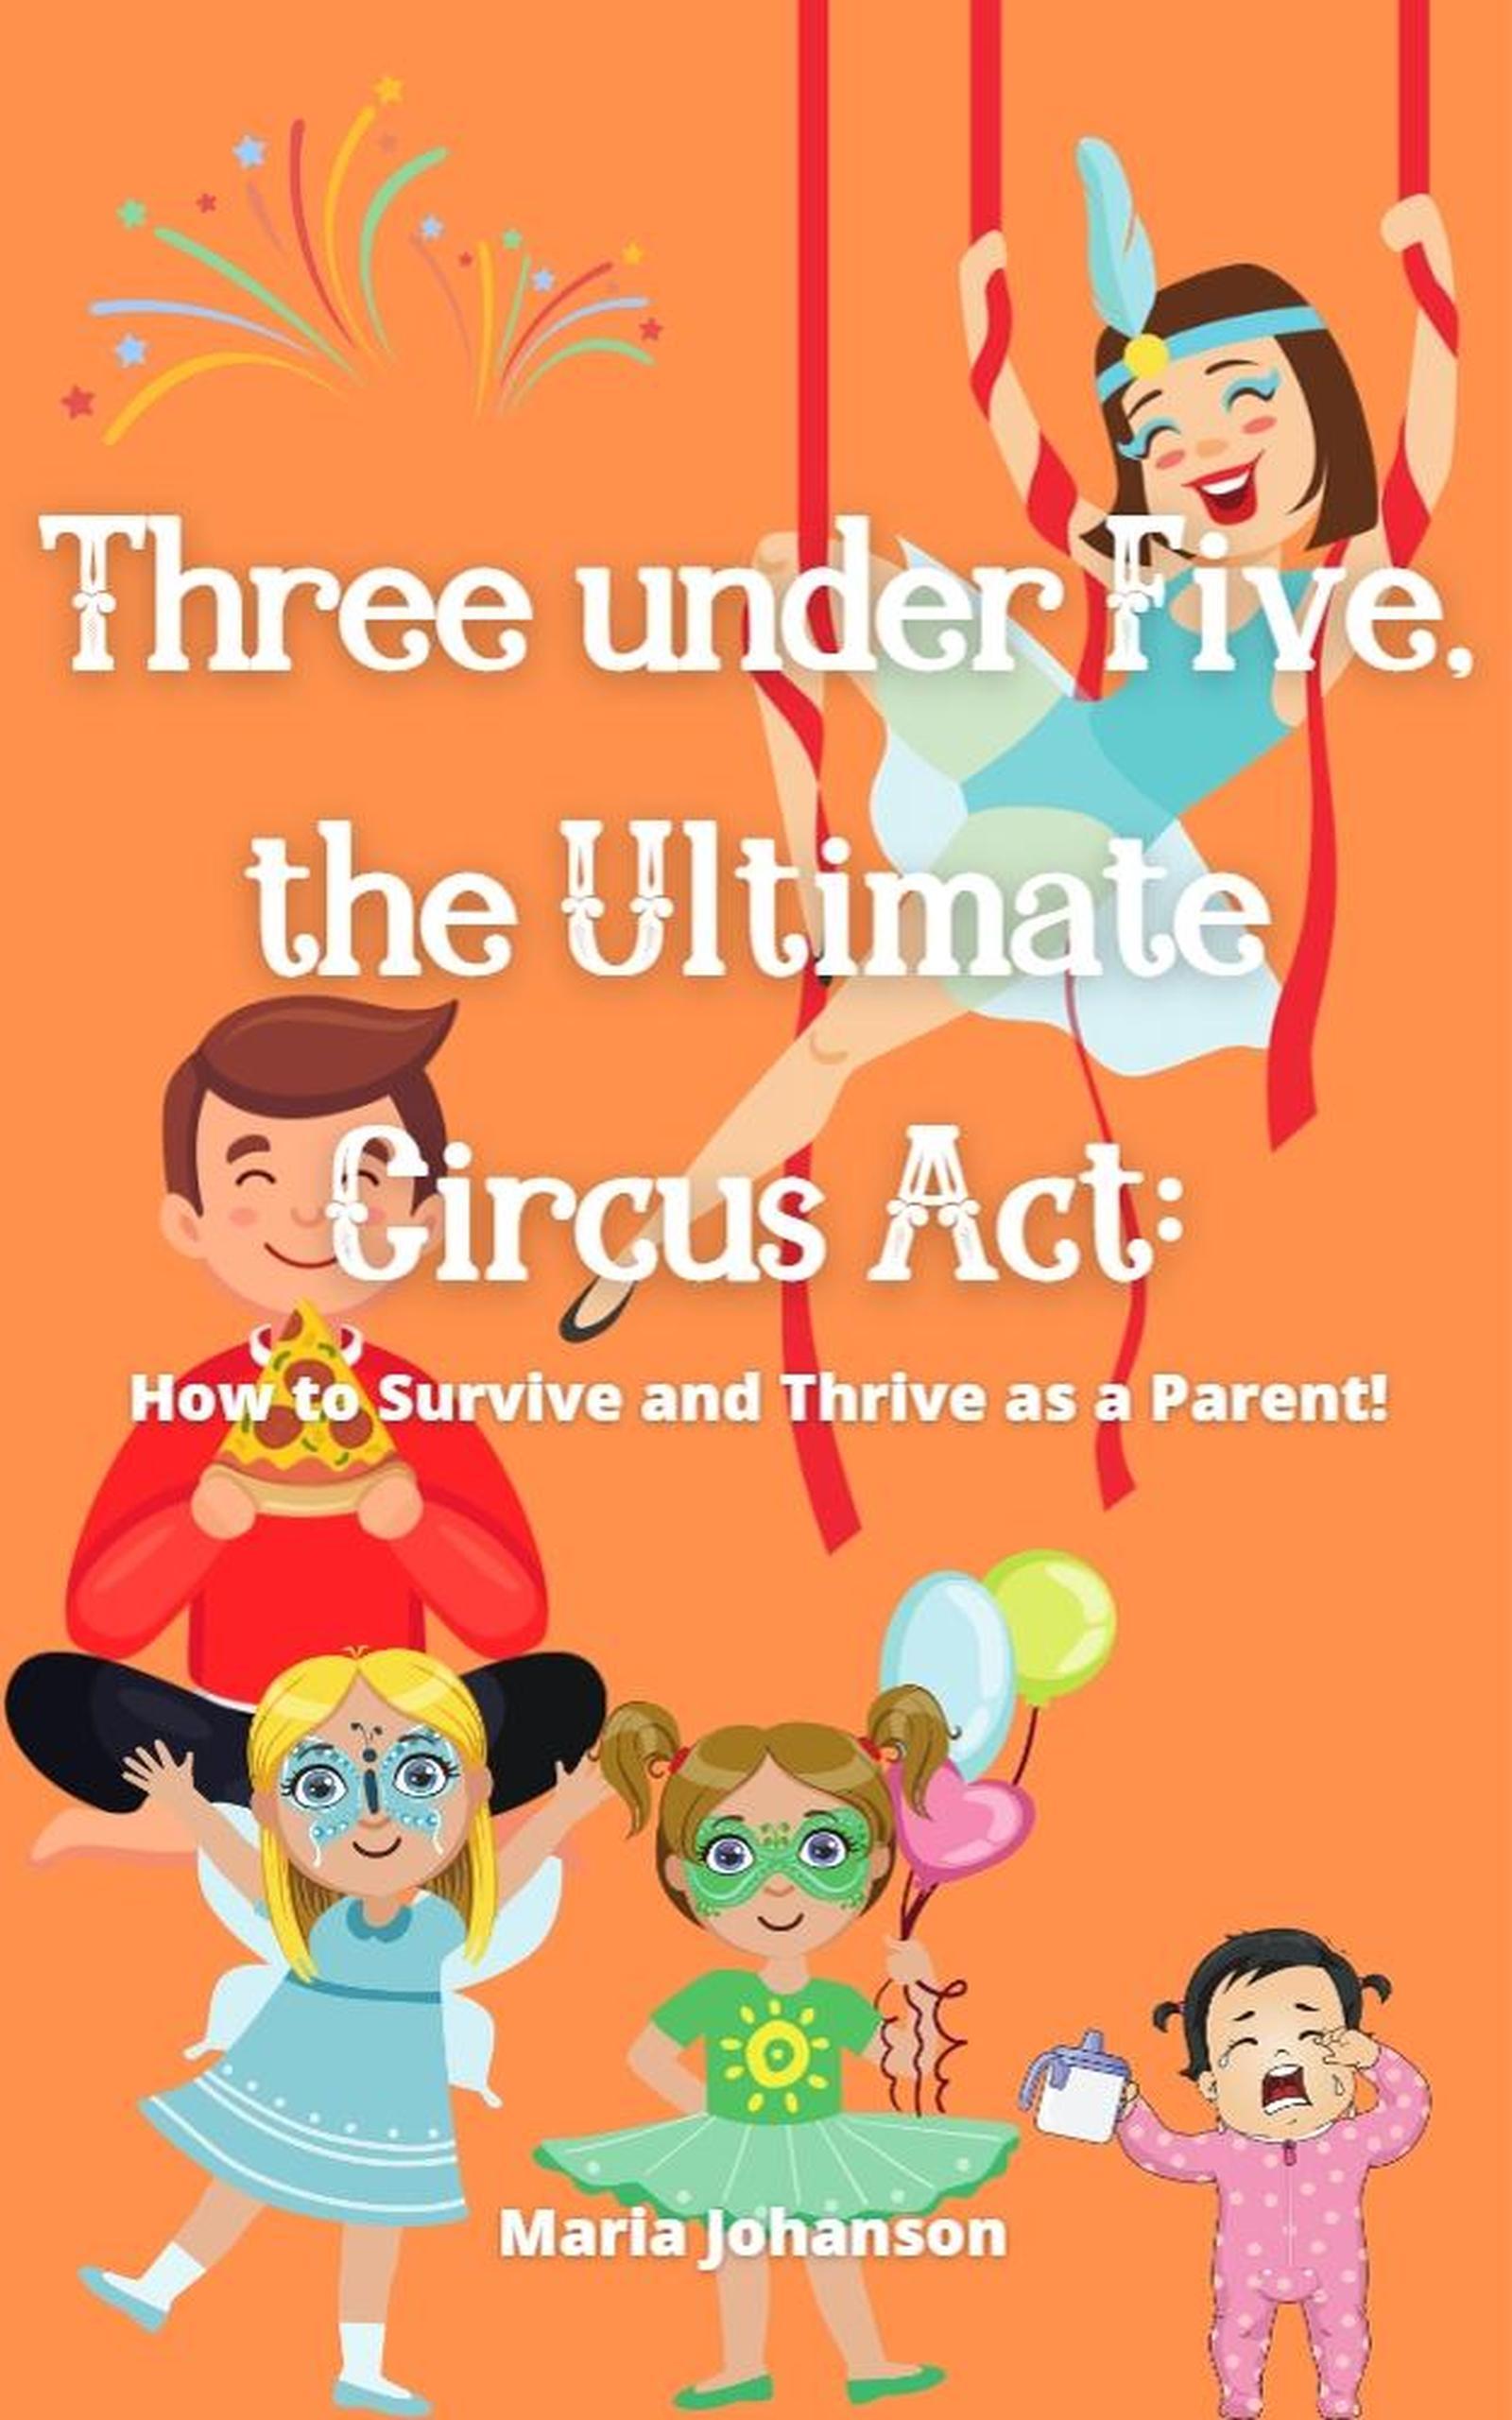 Act:　Weltbild　How　the　Five,　and　Thrive　a　as　Three　eBook　v.　Circus　Johanson　under　to　Parent　Ultimate　Survive　Maria